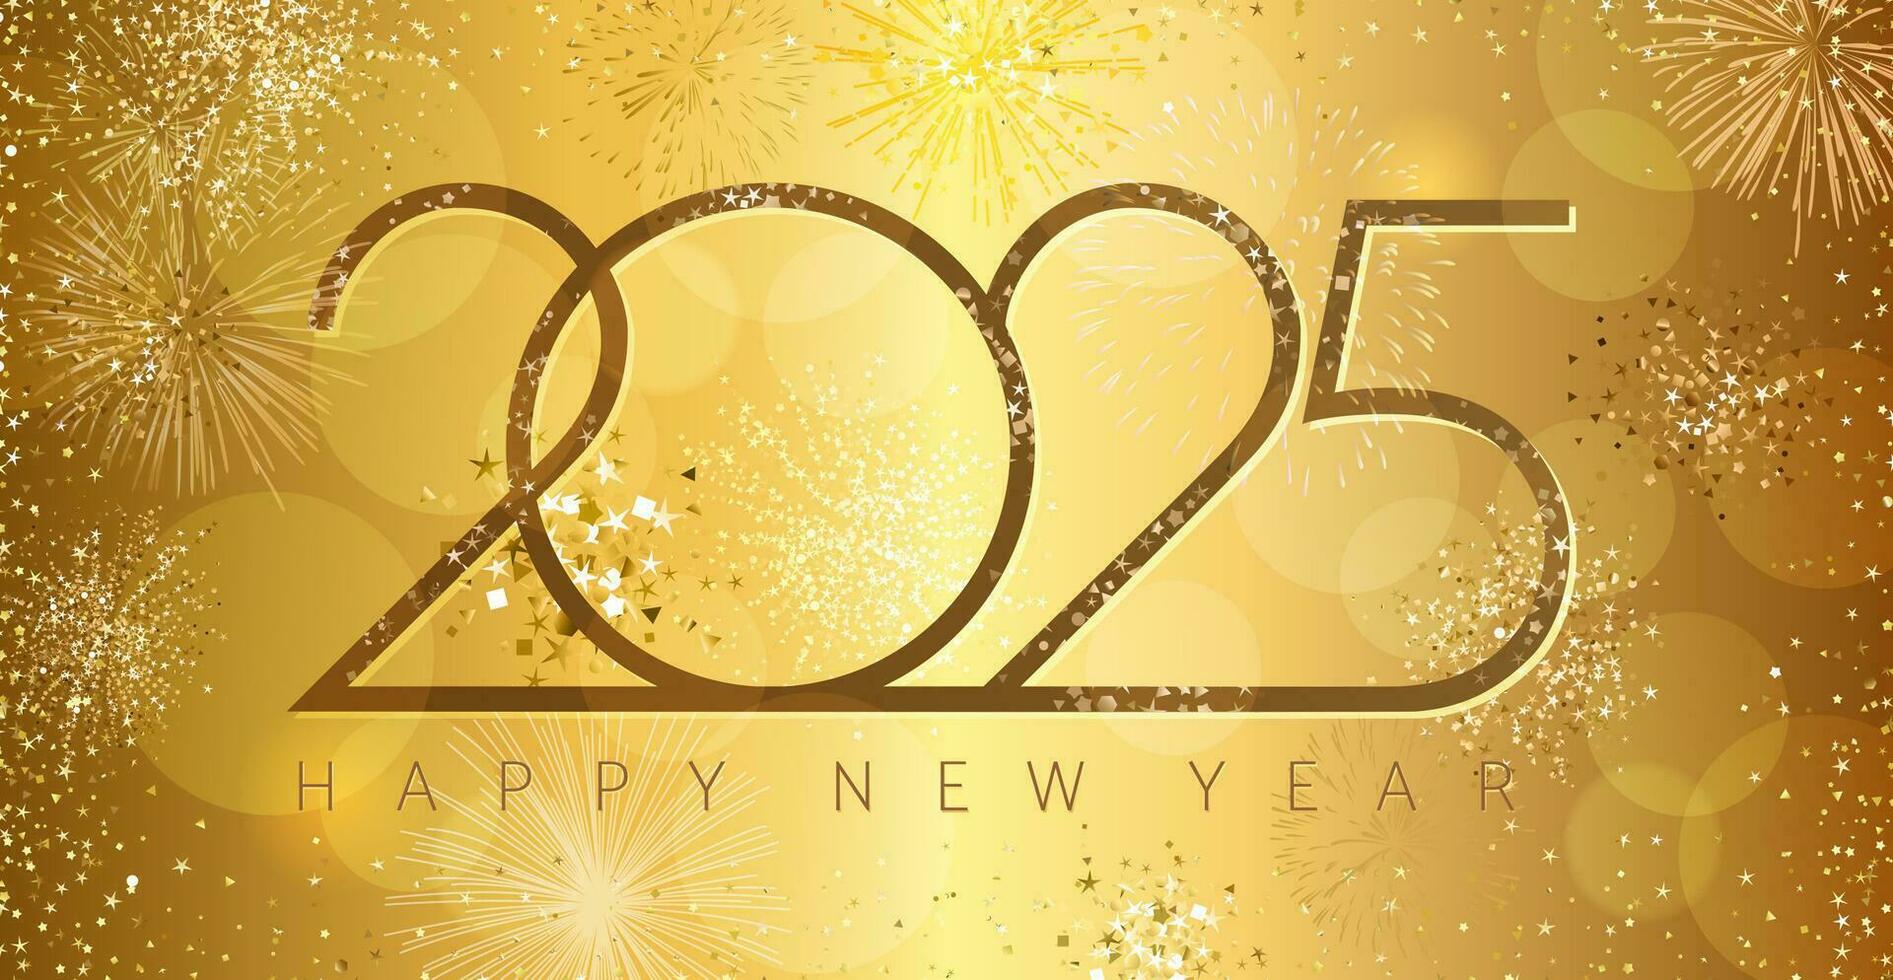 Happy 2025 eve vector illustration. Golden background. Happy New Year congrats with creative number